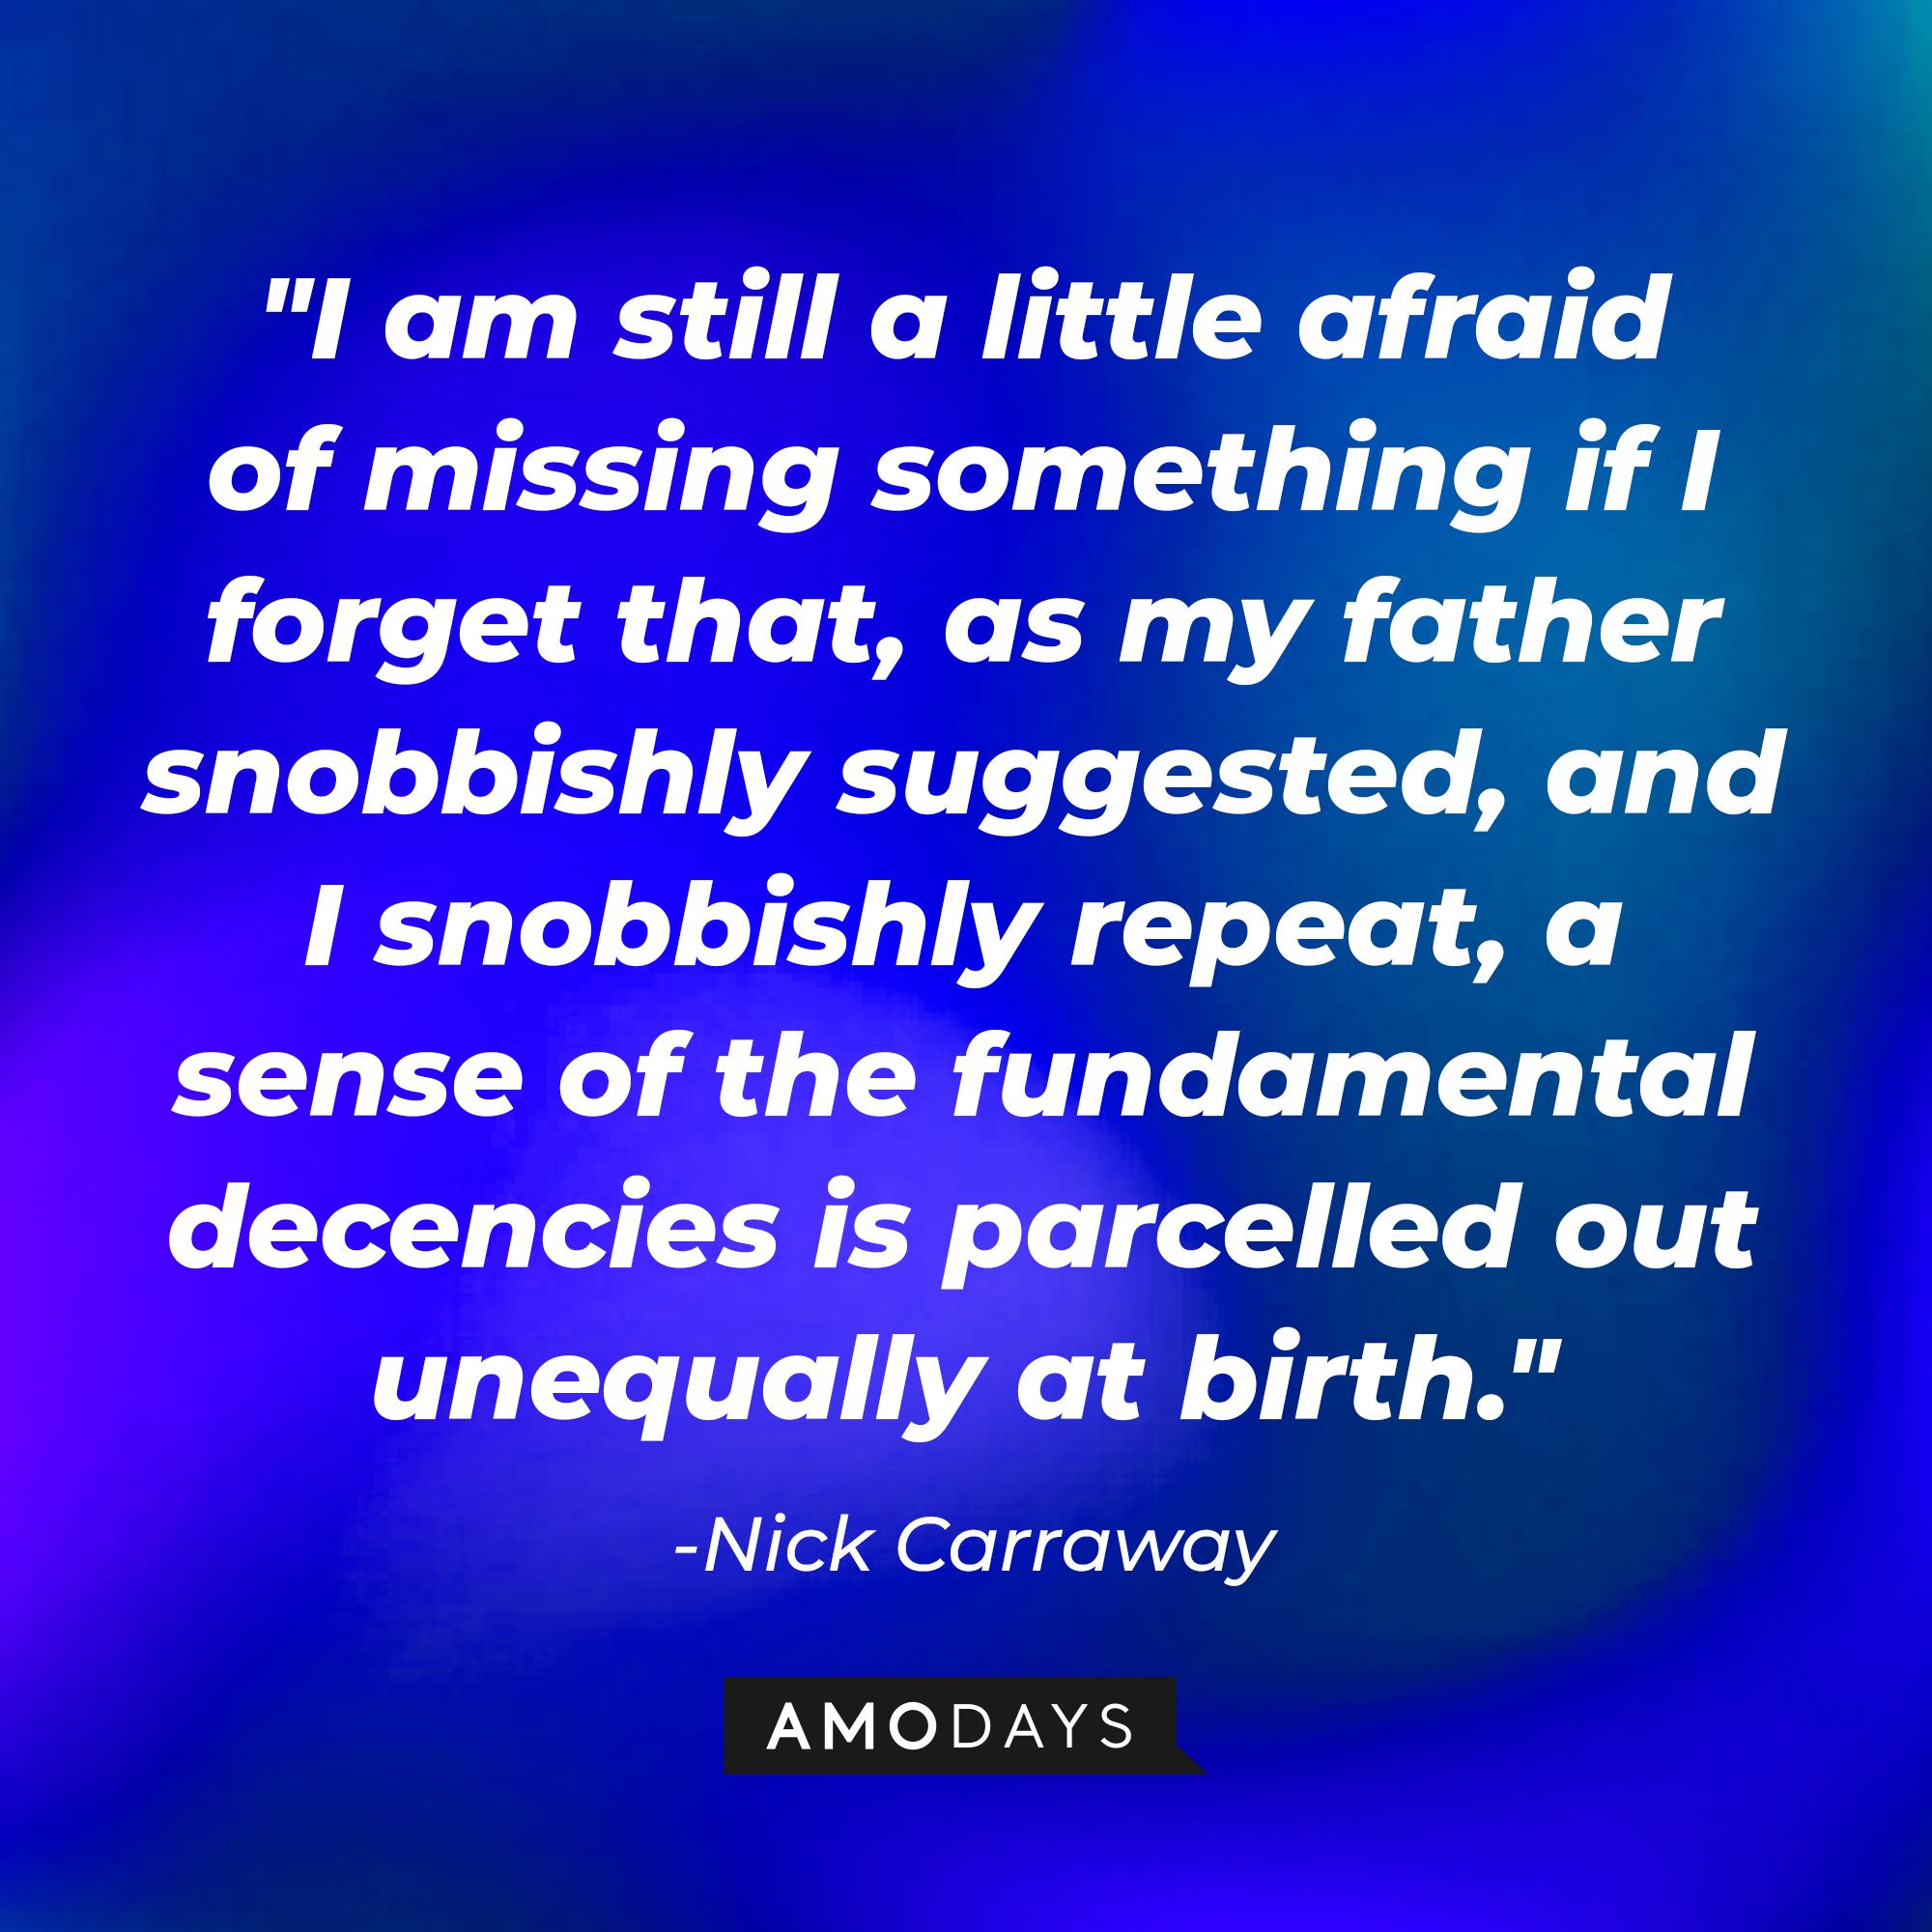 Nick Carraway's quote, " I am still a little afraid of missing something if I forget that, as my father snobbishly suggested, and I snobbishly repeat, a sense of the fundamental decencies is parcelled out unequally at birth." | Source: Amodays